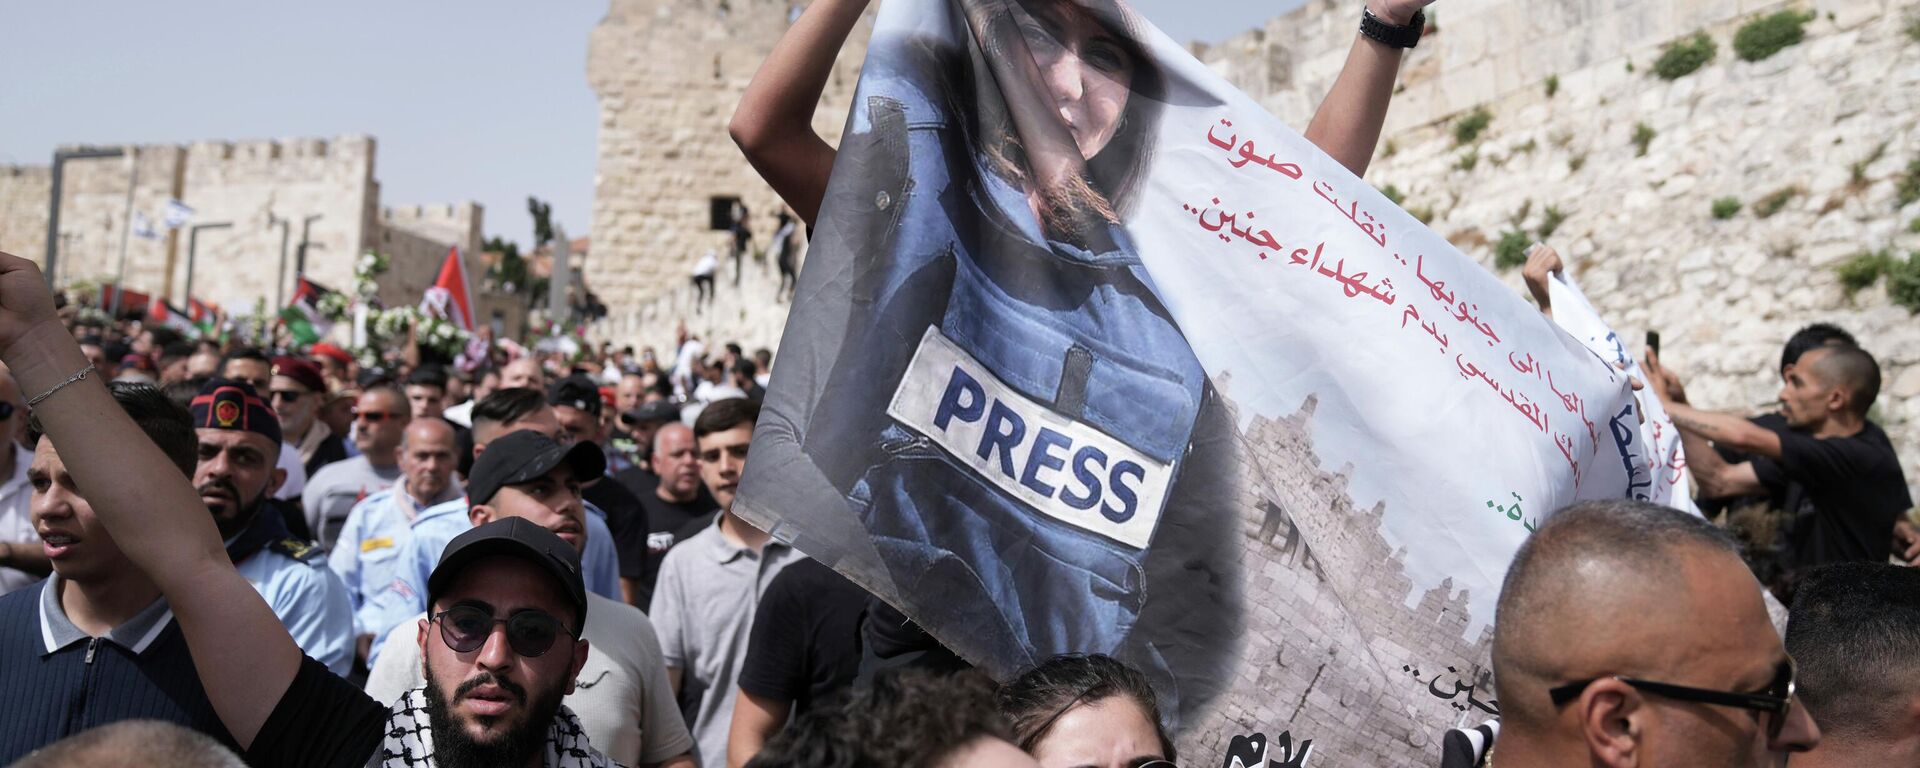 Mourners hold a banner depicting slain Al Jazeera veteran journalist Shireen Abu Akleh as they walk from the Old City of Jerusalem to her burial site, Friday, May 13, 2022. - Sputnik International, 1920, 13.07.2022